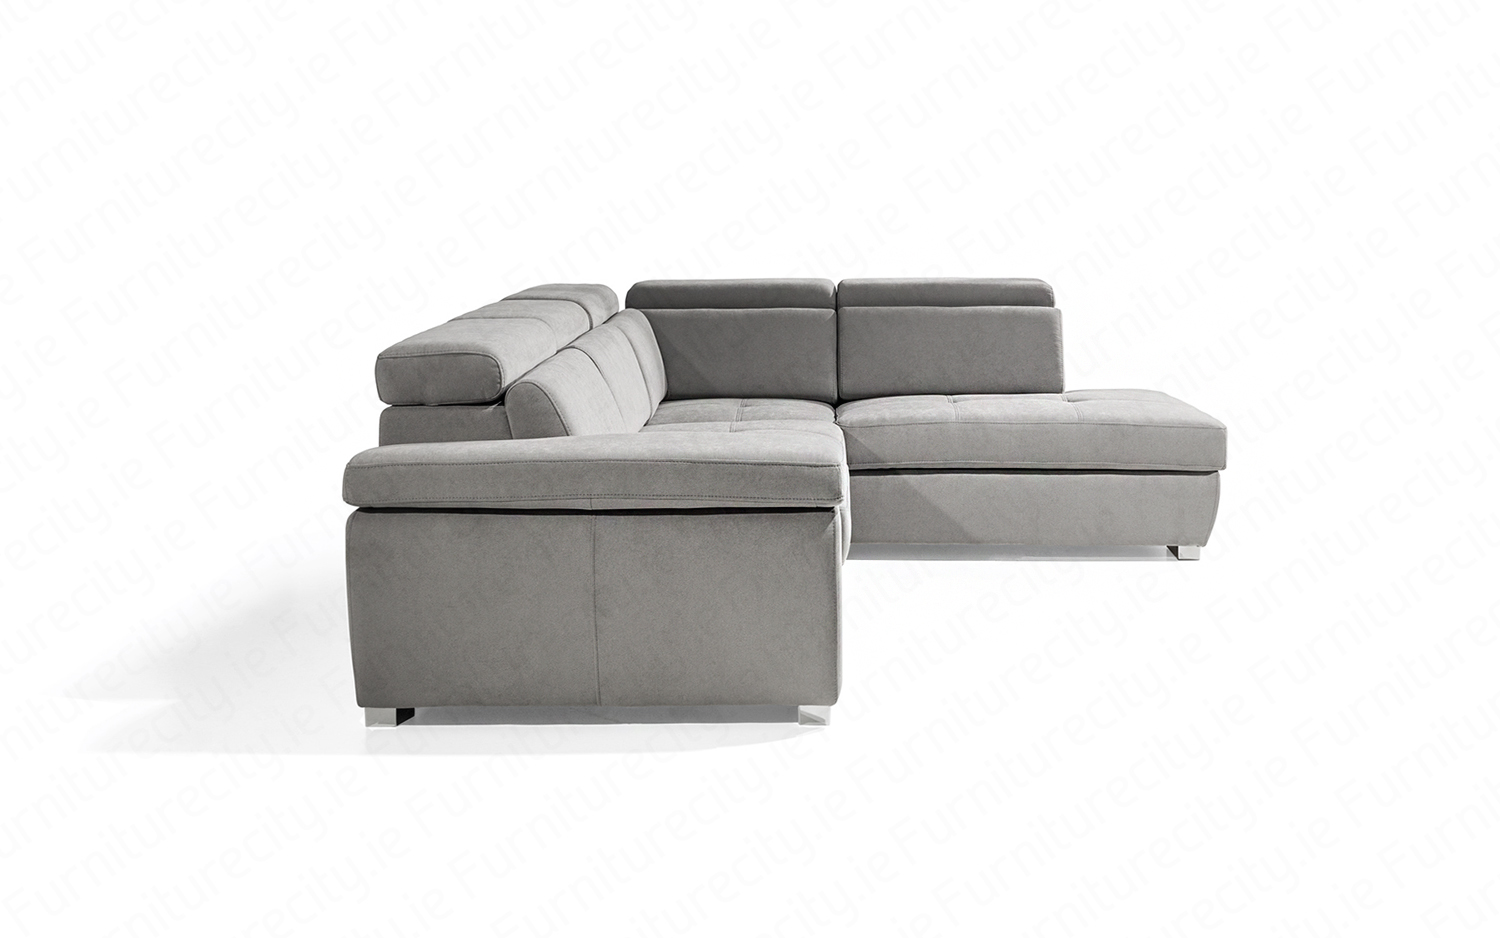 Sofa bed ROSY OPEN by Furniturecity.ie